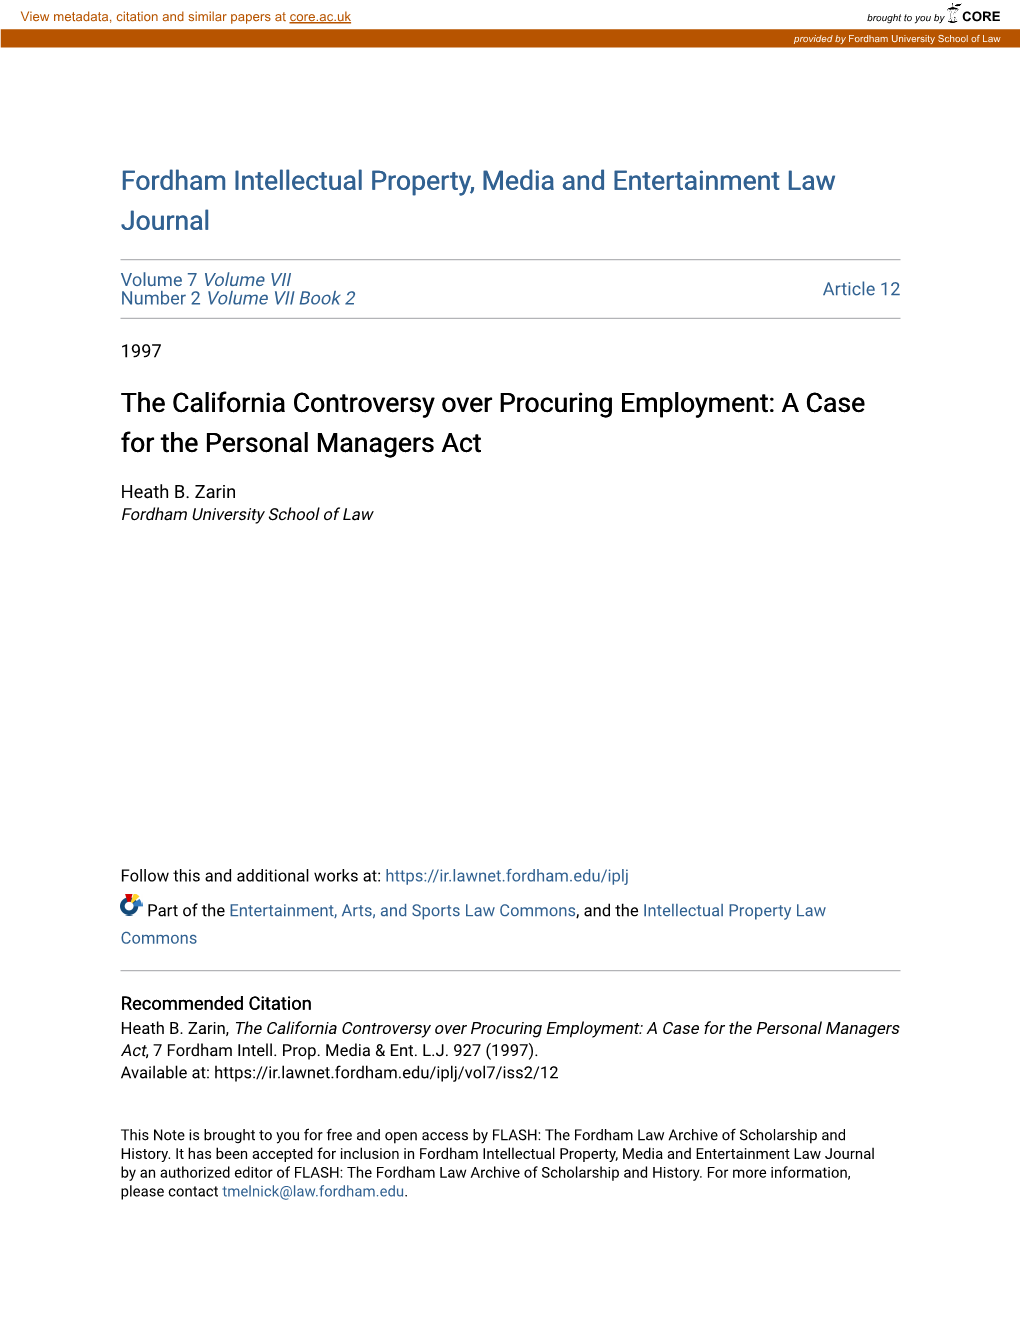 The California Controversy Over Procuring Employment: a Case for the Personal Managers Act